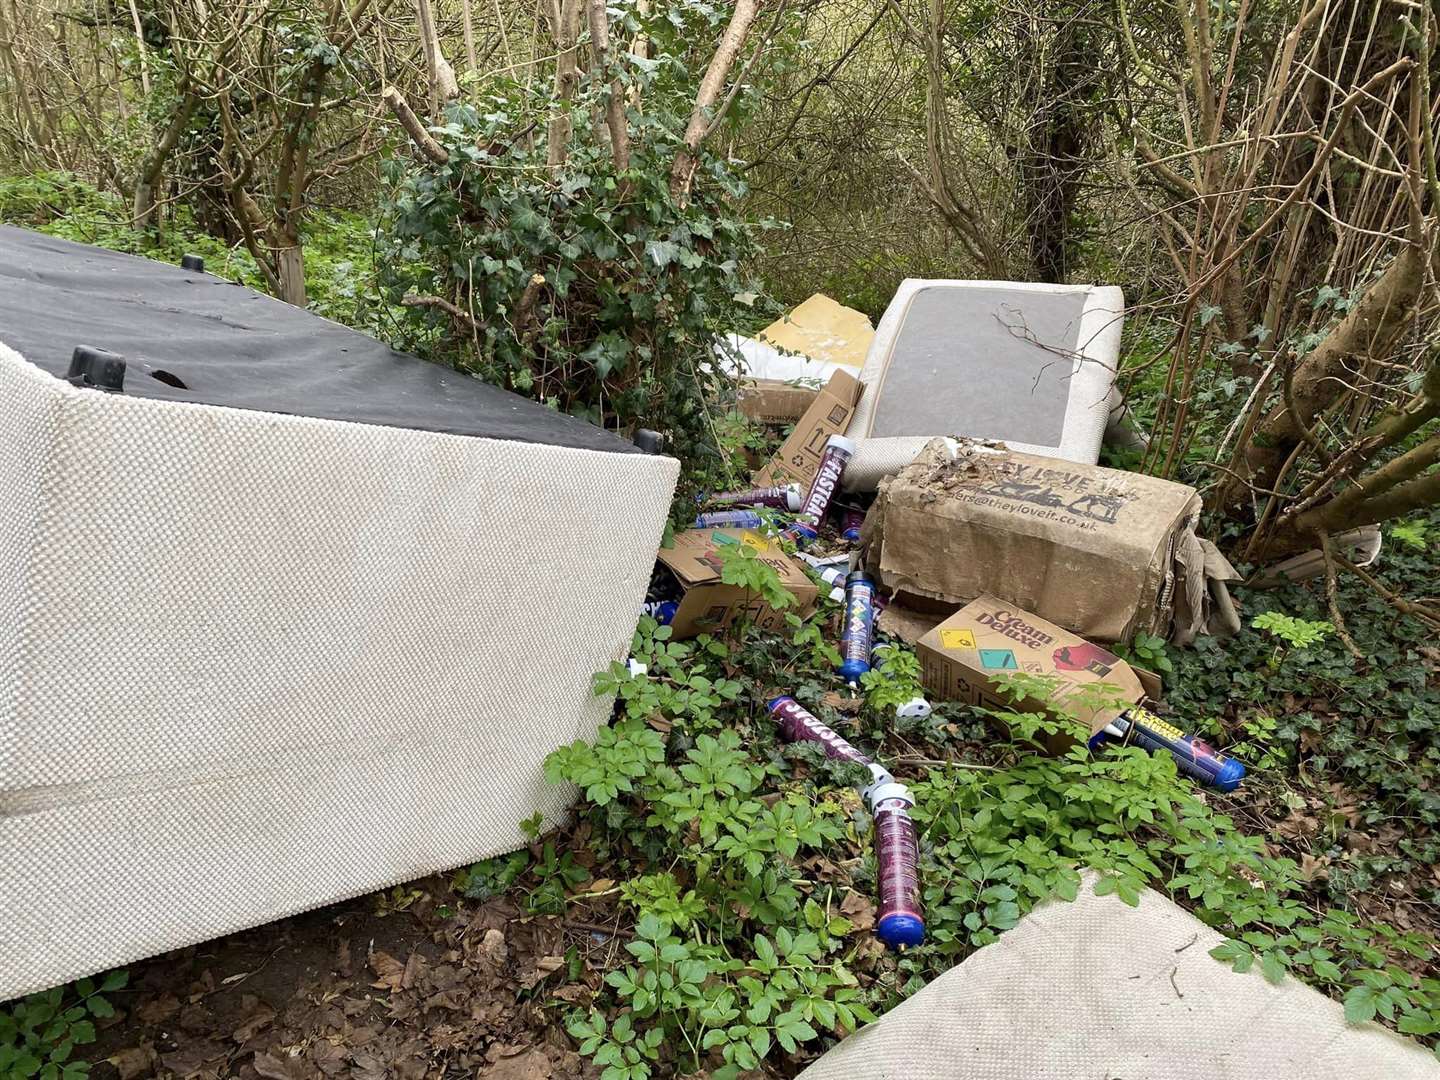 'We should be recovering the full cost of fly-tipping,' says Cllr Jeffery